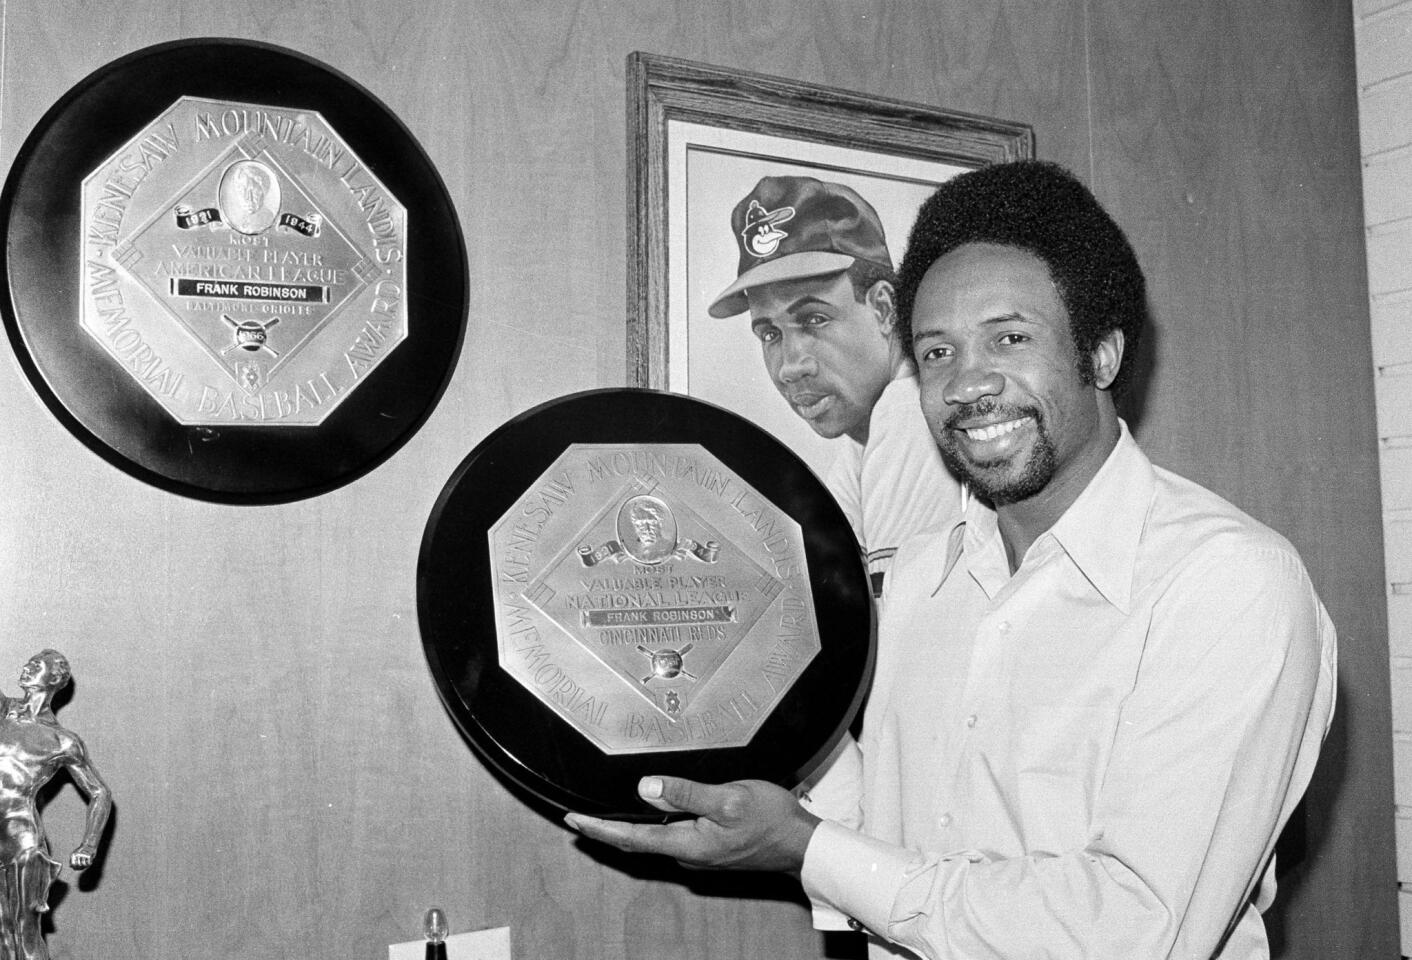 Frank Robinson displays trophies he received for being the Most Valuable Player in both the American and National Leagues at his home in Los Angeles in 1971.